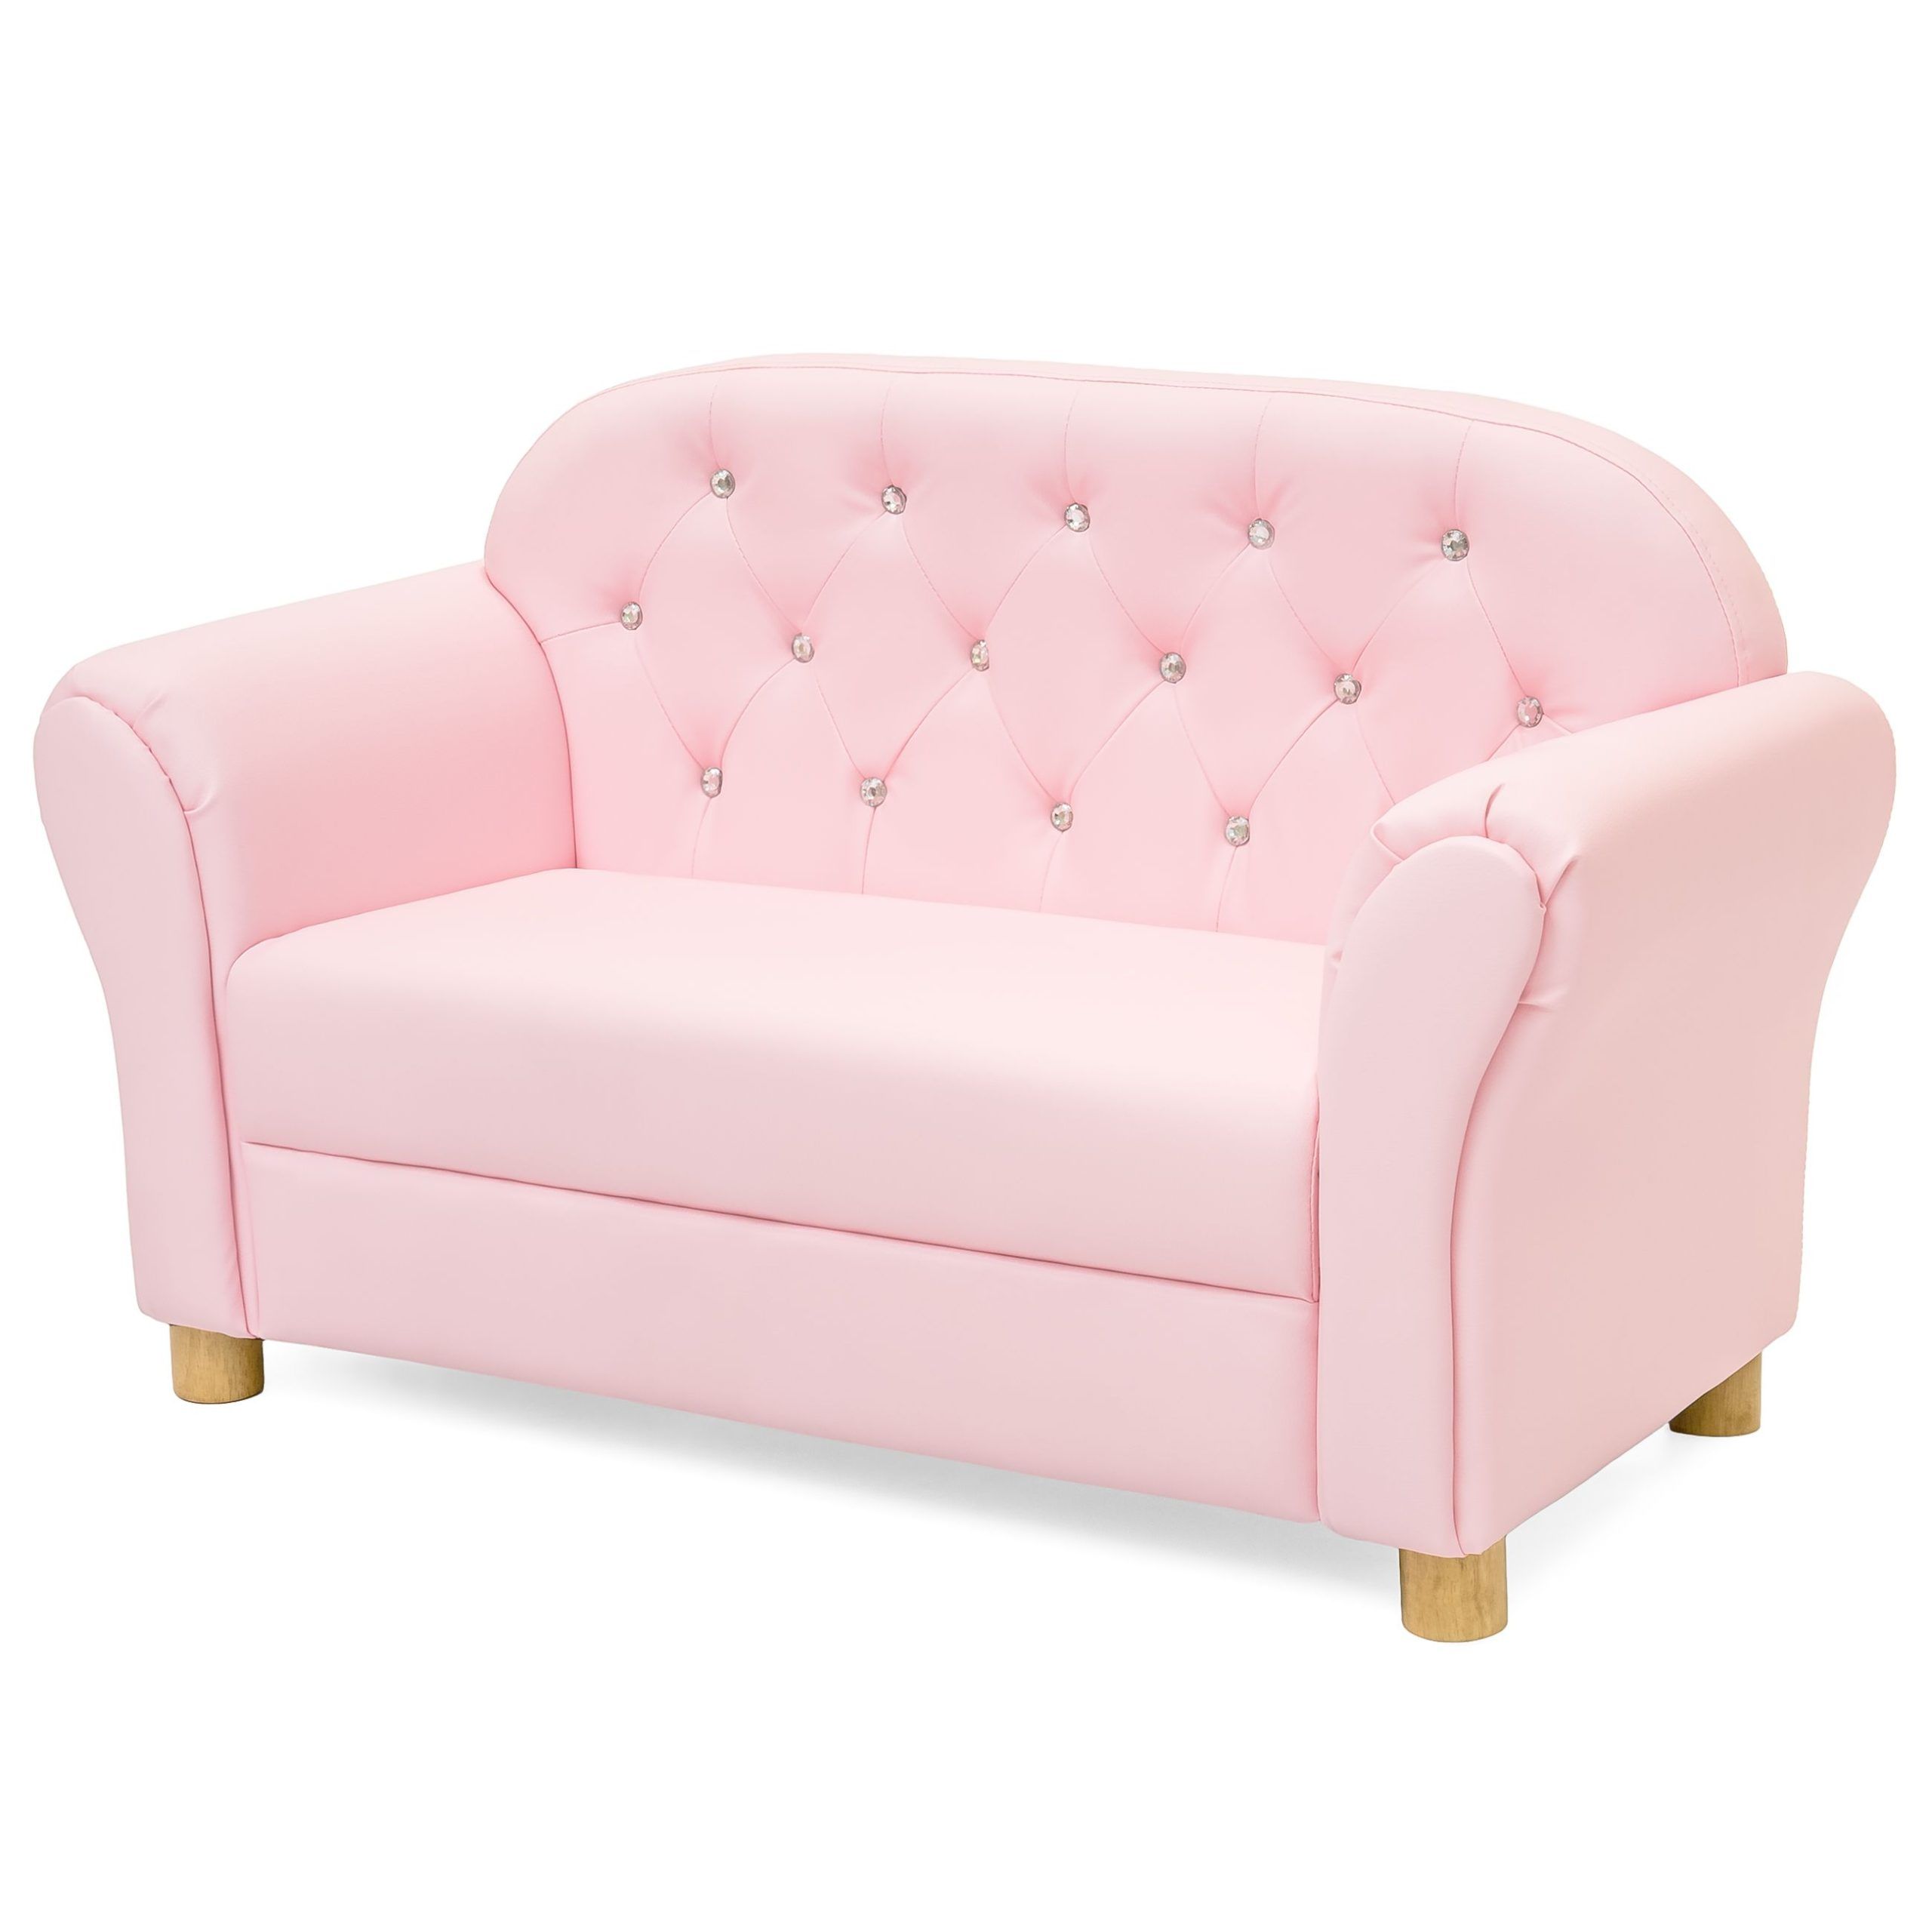 Best Choice Products 36in Upholstered Tufted Mini Sofa Couch For Kids Within Children's Sofa Beds (Gallery 13 of 20)